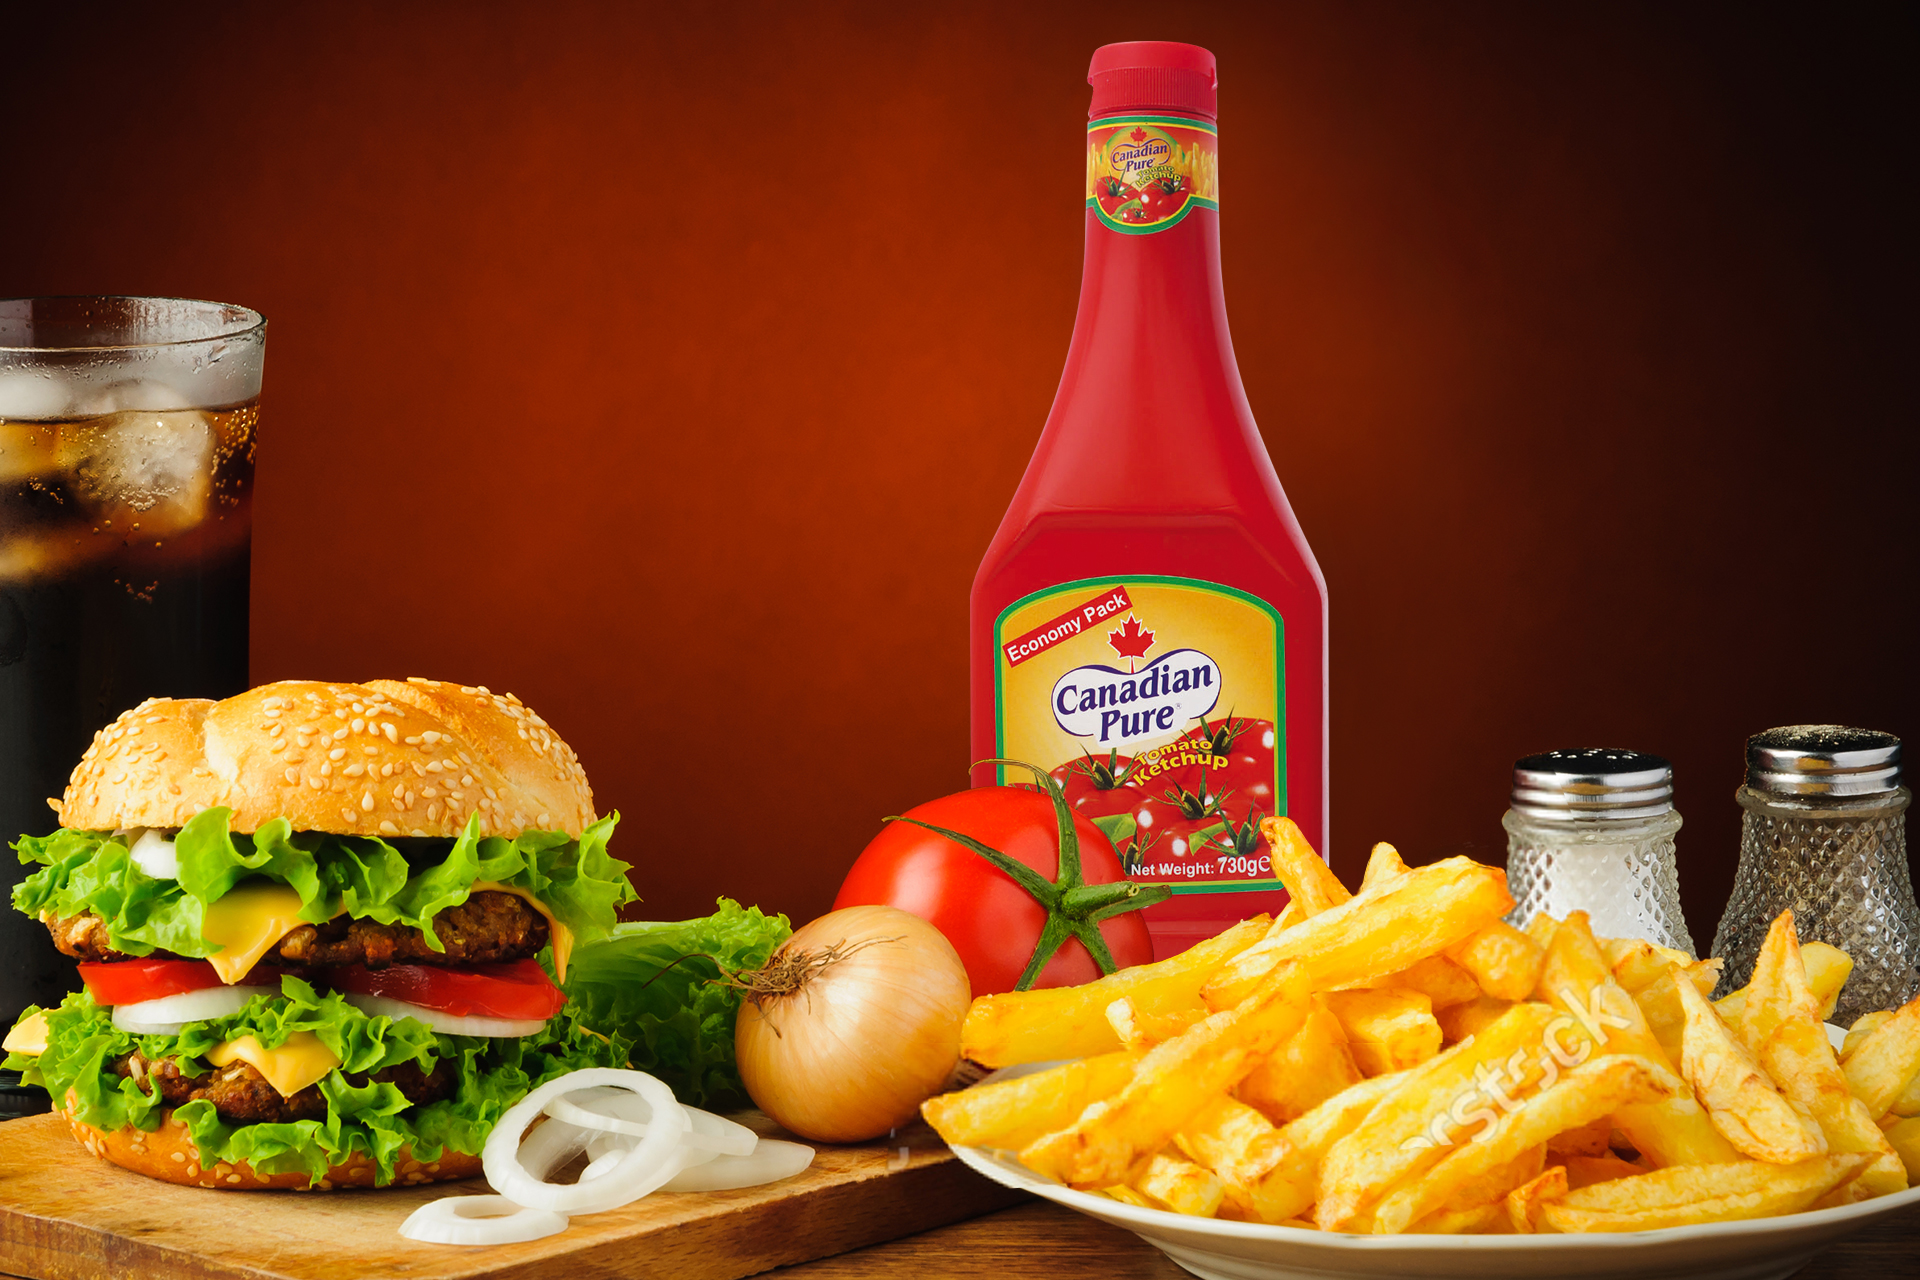 https://orbitsarl.com/wp-content/uploads/2017/09/Product-Food_CanadianPure-Ketchup-730g_1920x1280-FIN.jpg